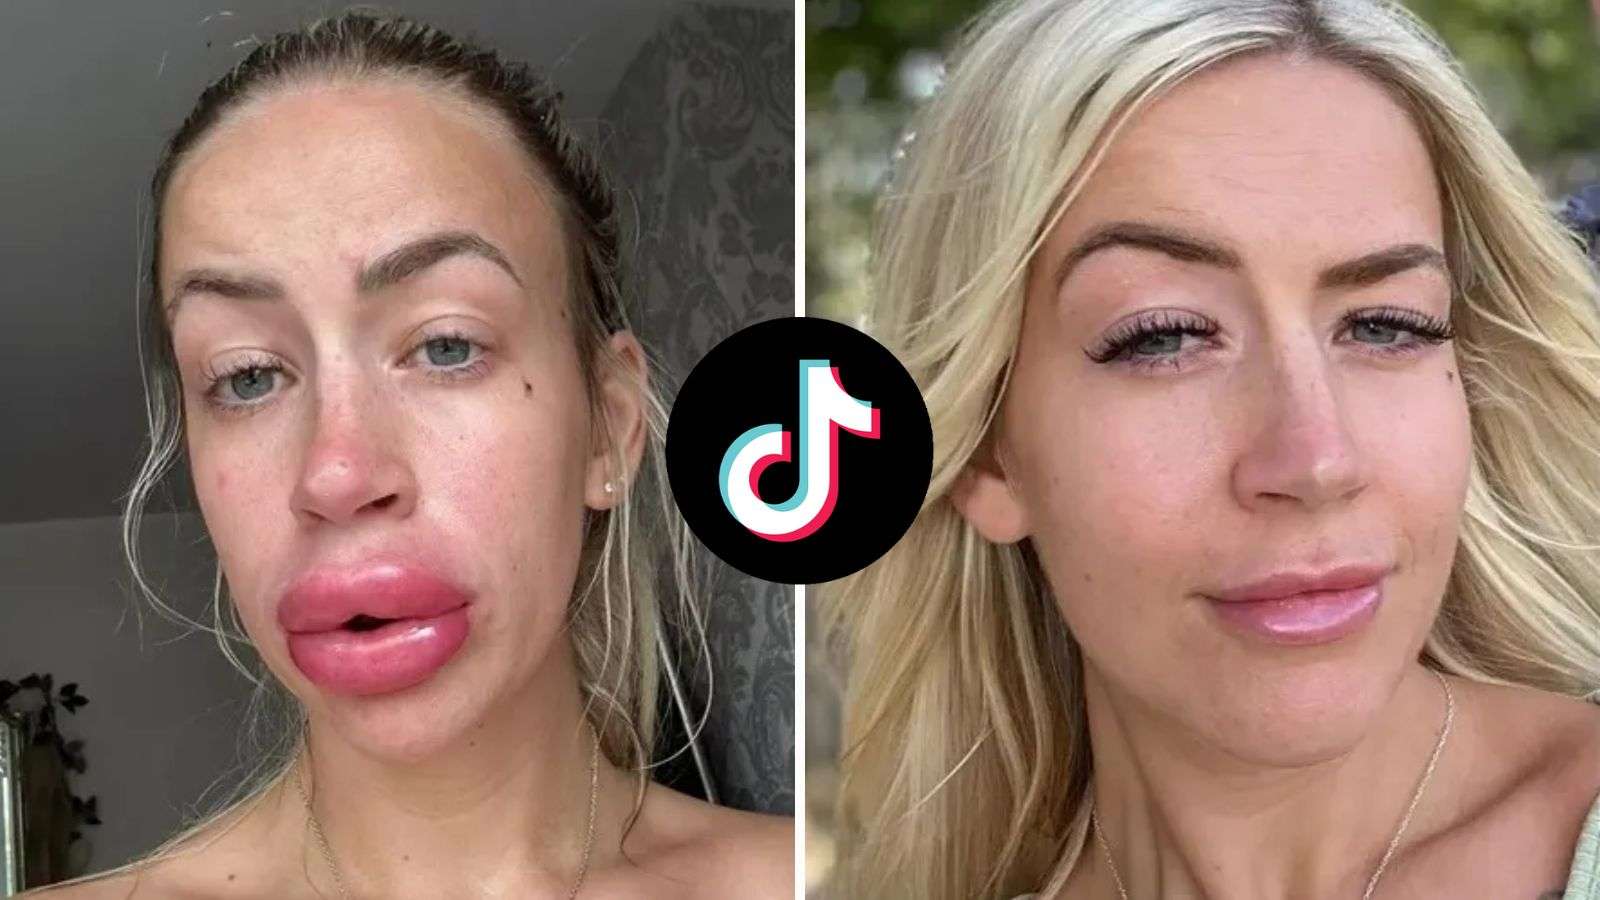 Woman with huge swollen lips after getting lip fillers dissolved